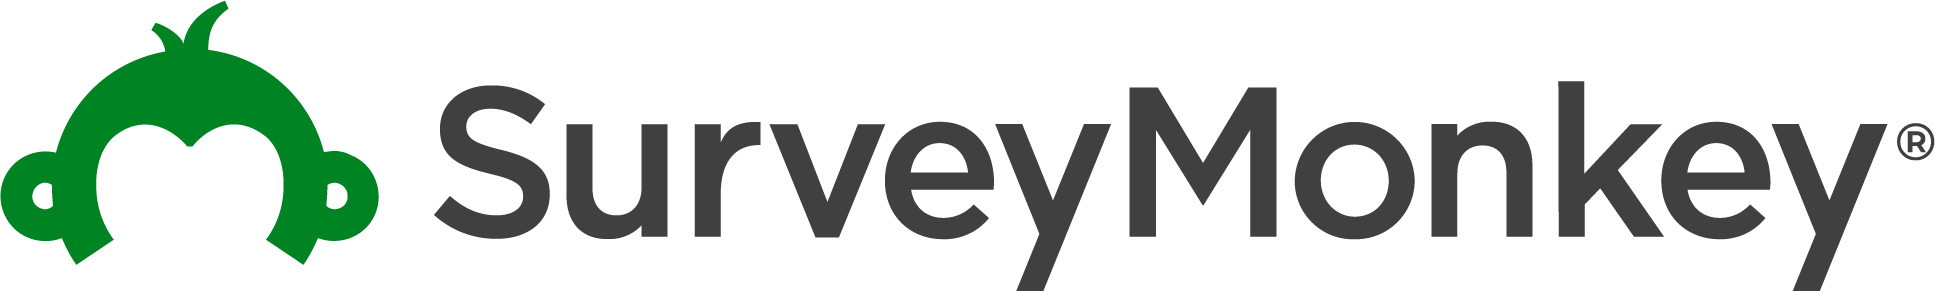 SurveyMonkey logo with black text and a green monkey head outline on a white background.